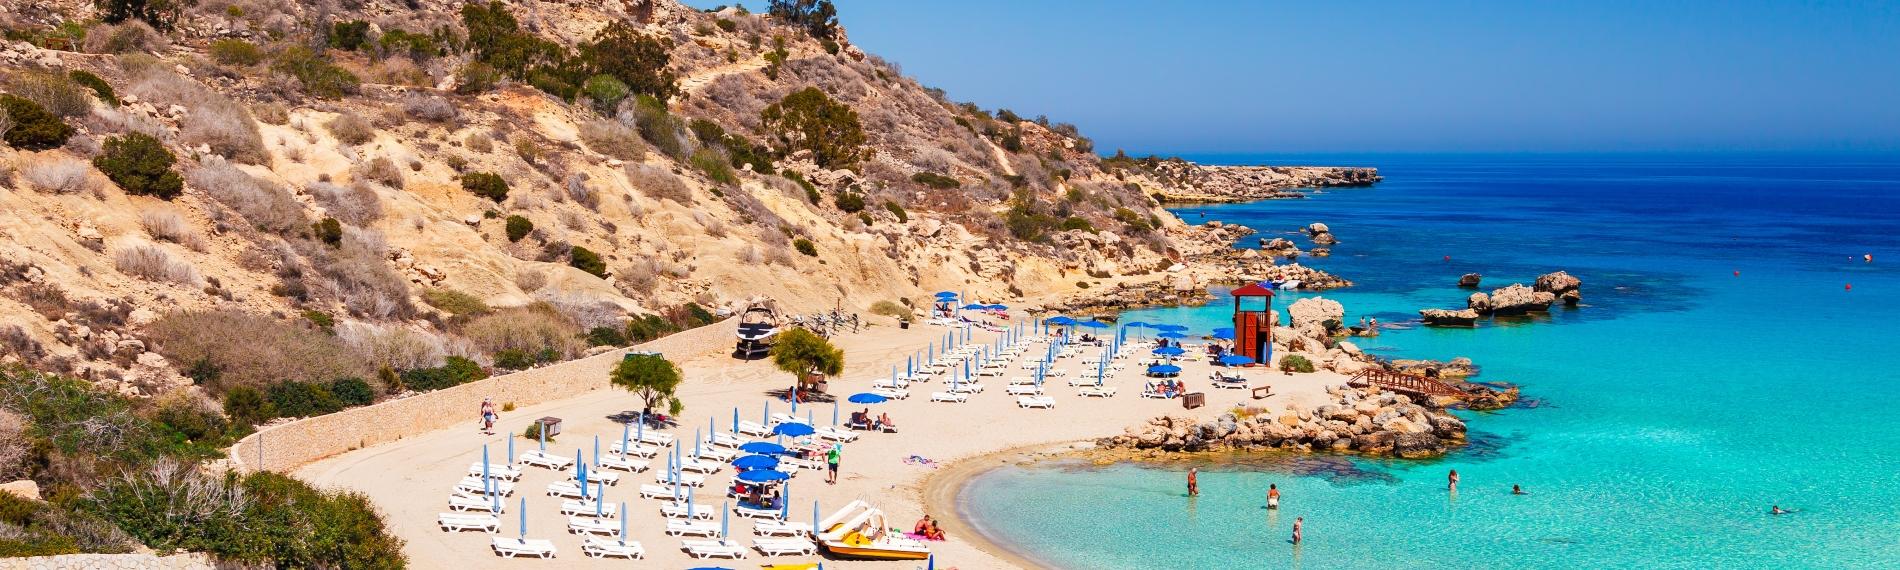 A view of Nissi Beach in Cyprus